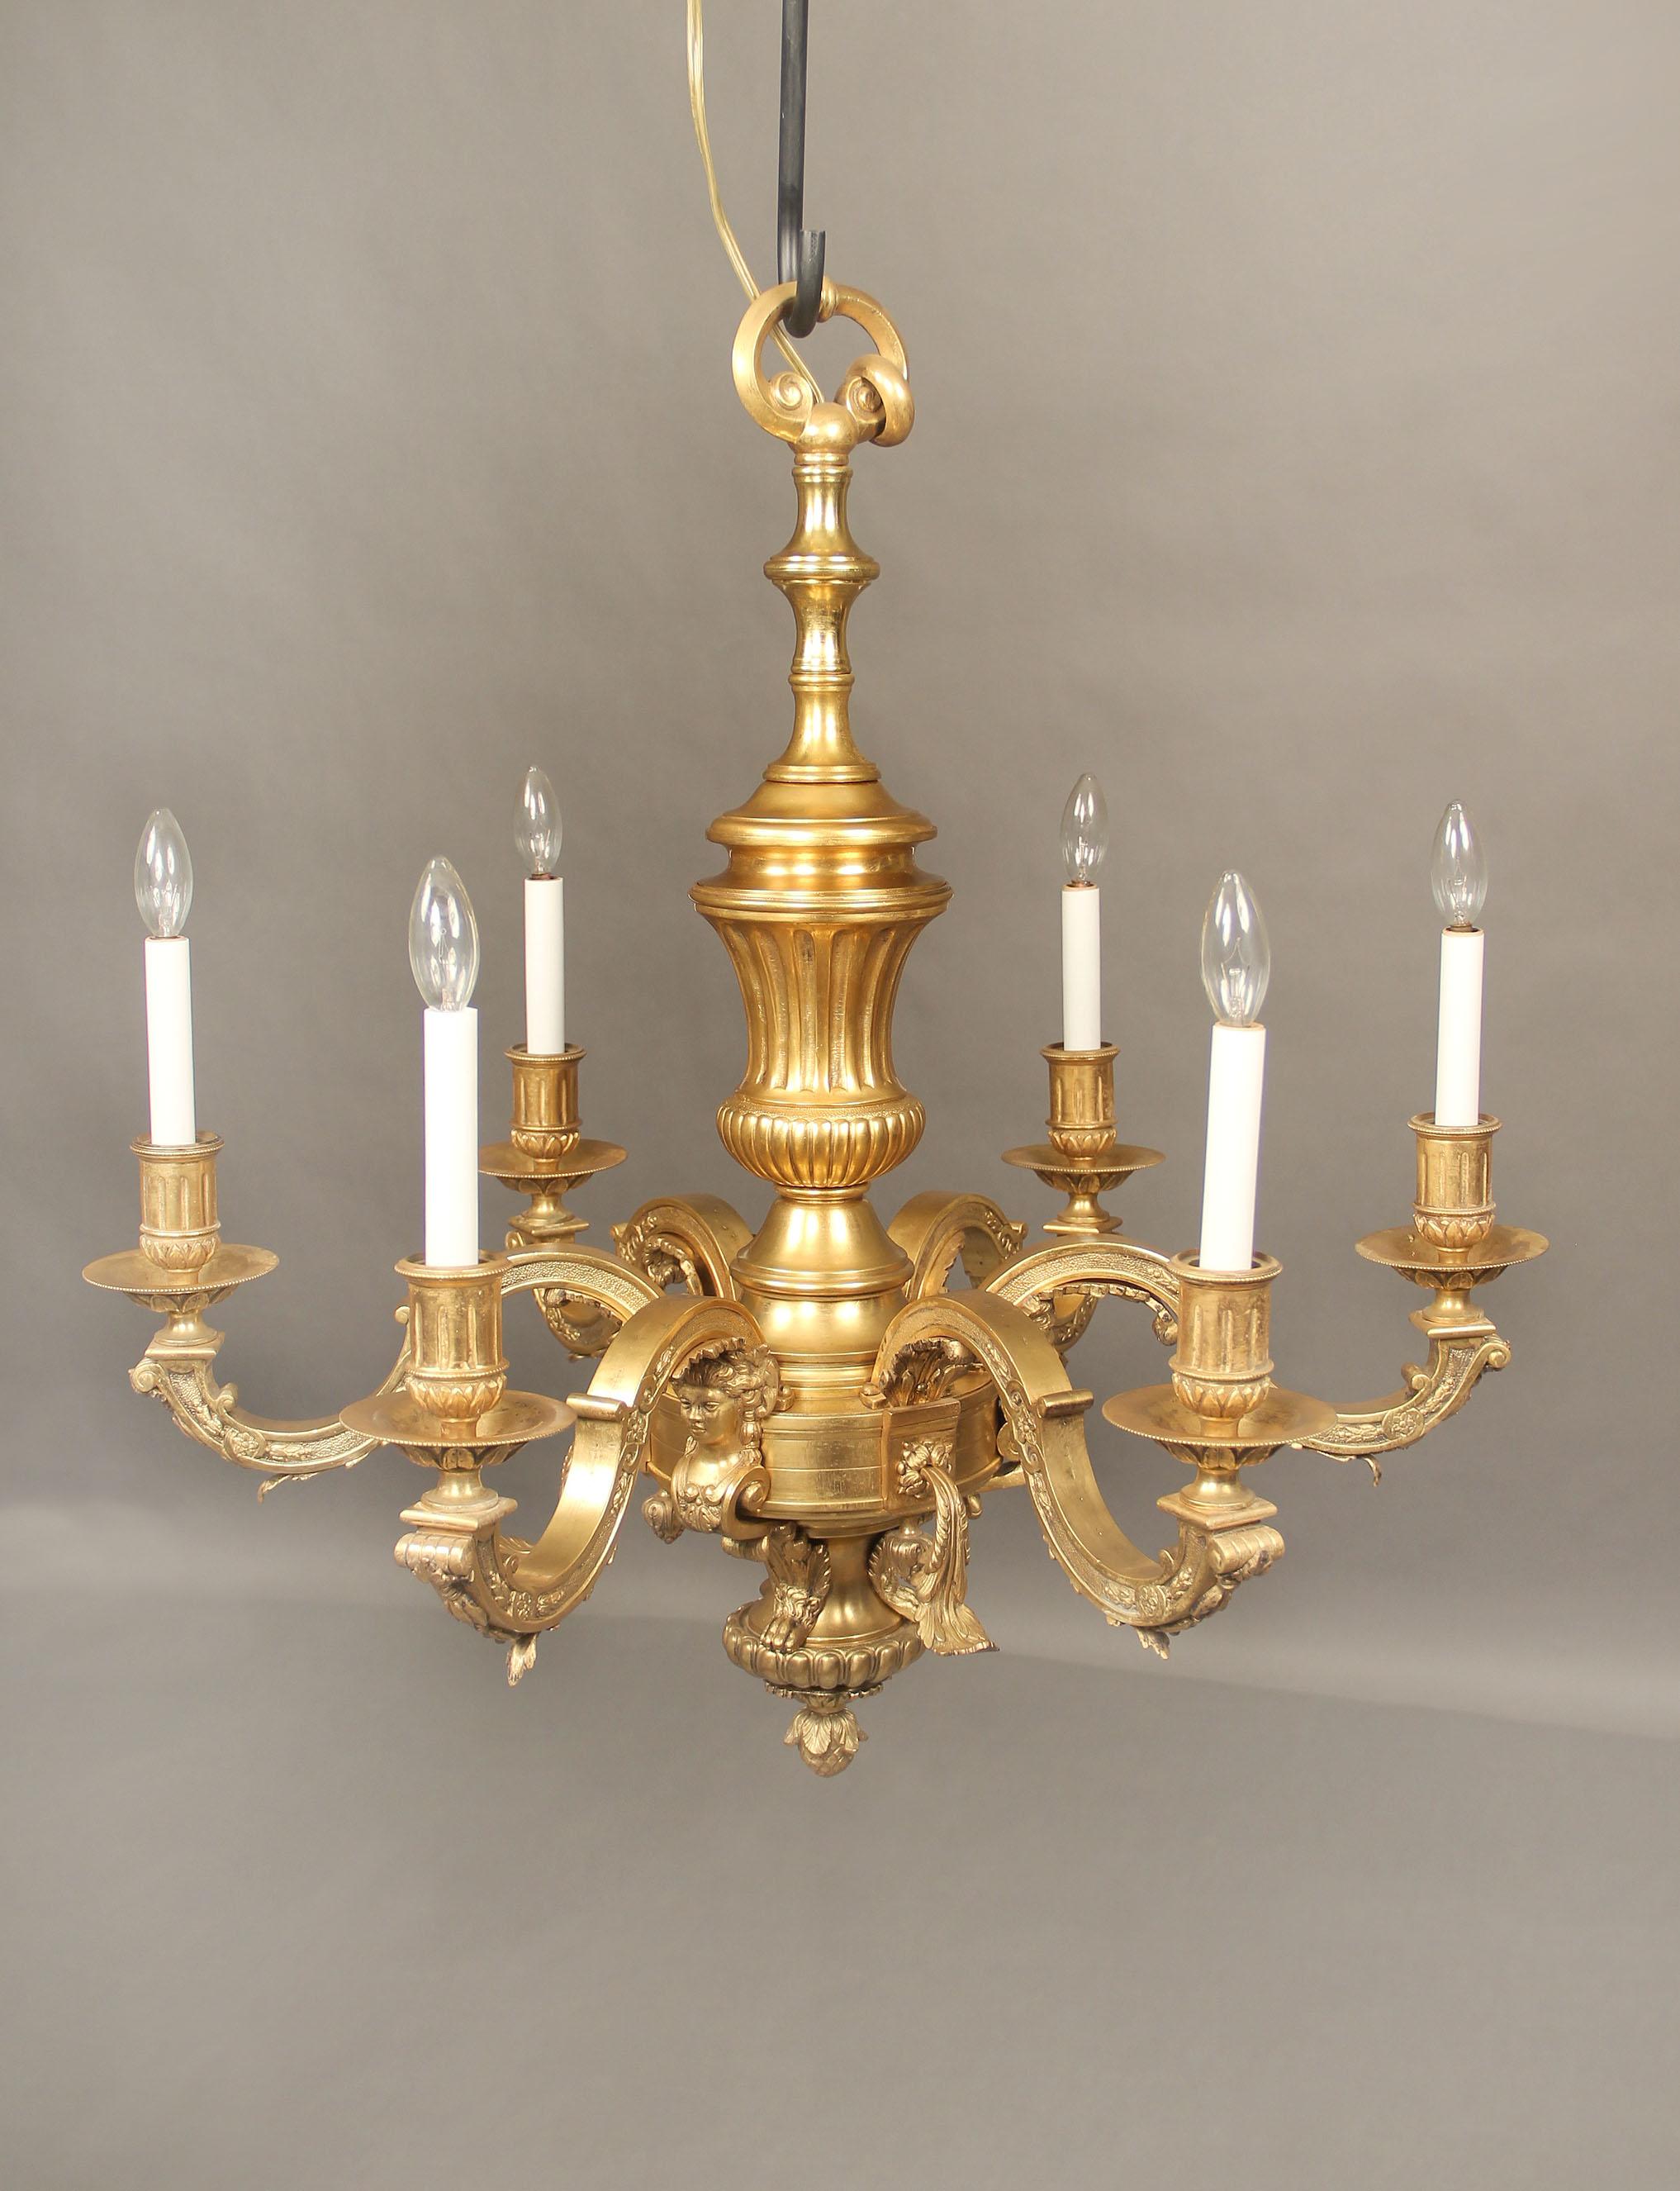 A late 19th century gilt bronze six light chandelier

The bronze frame with women busts and lion paw feet along the base, the arms with leaves and foliage, six perimeter lights.